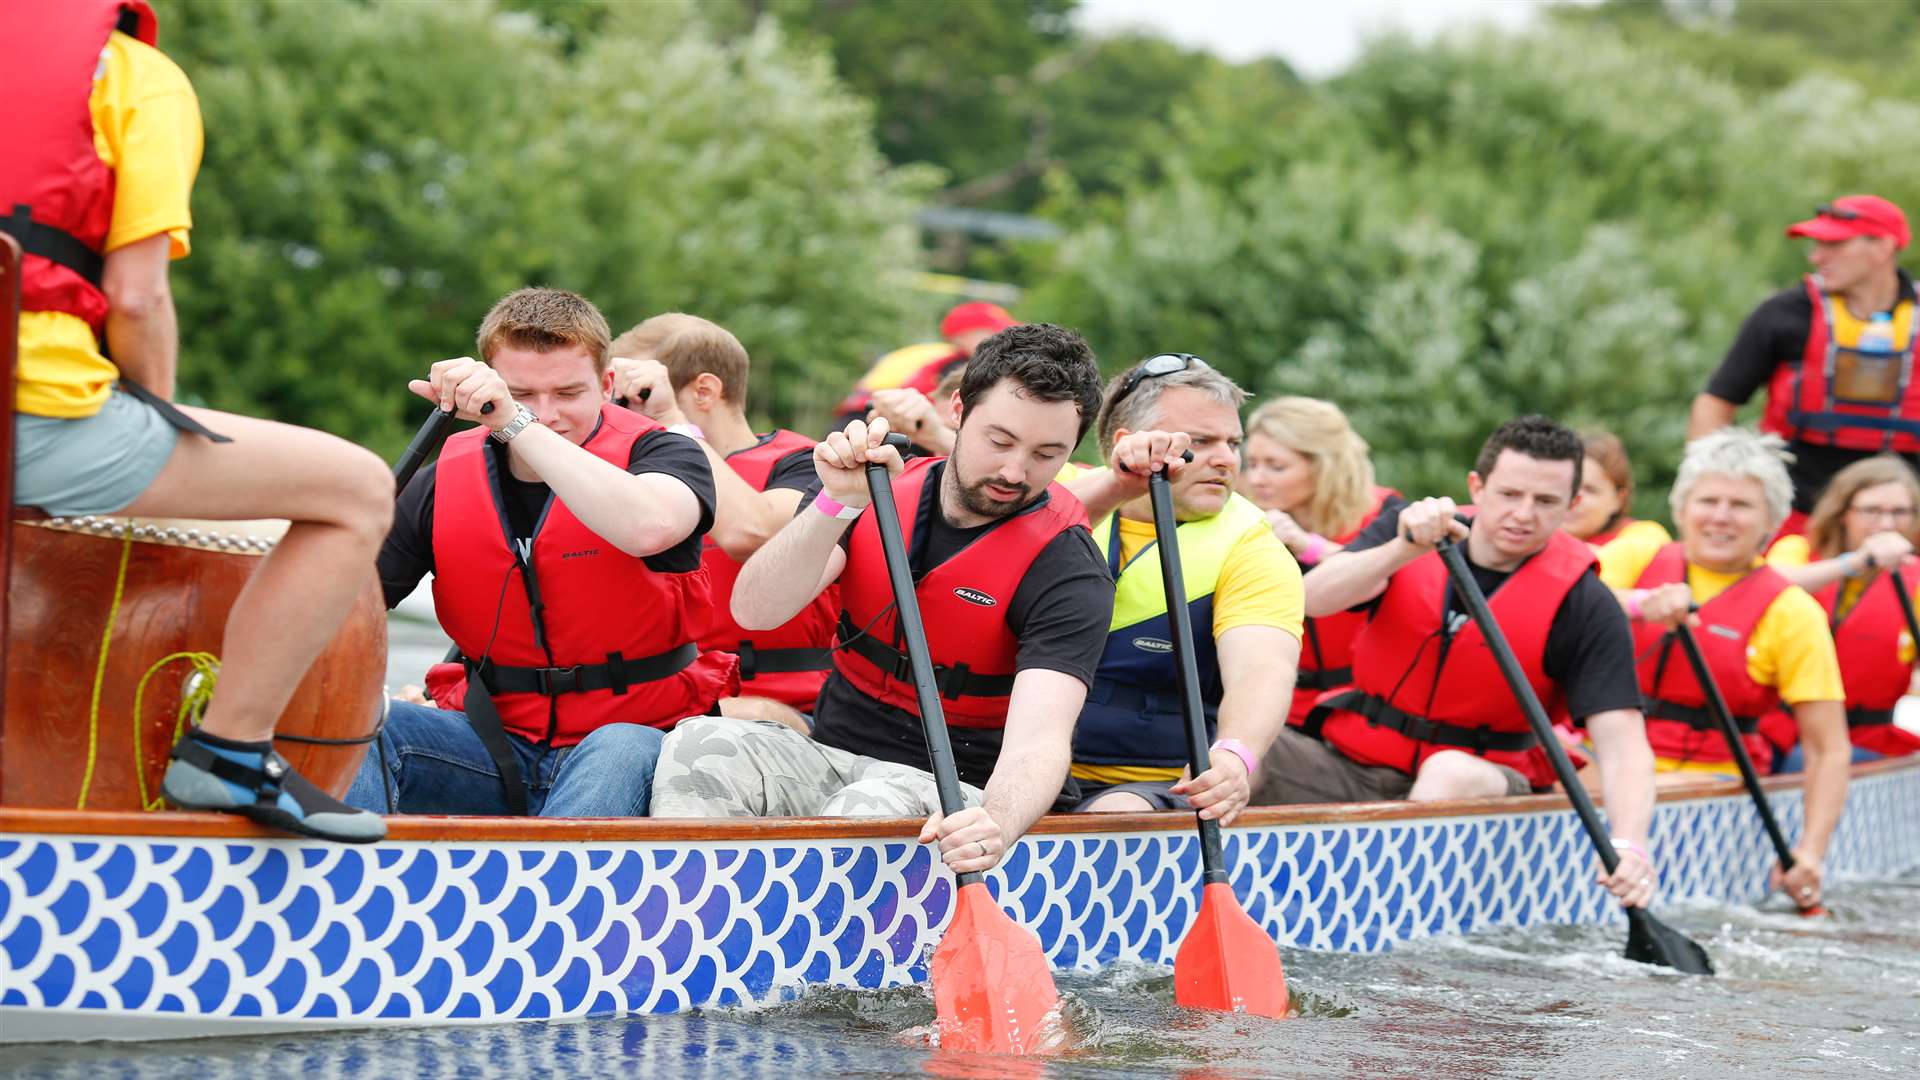 Experience the Difference team from Maidstone take to the water for last year's KM Dragon Boat Race at Mote Park, Maidstone.